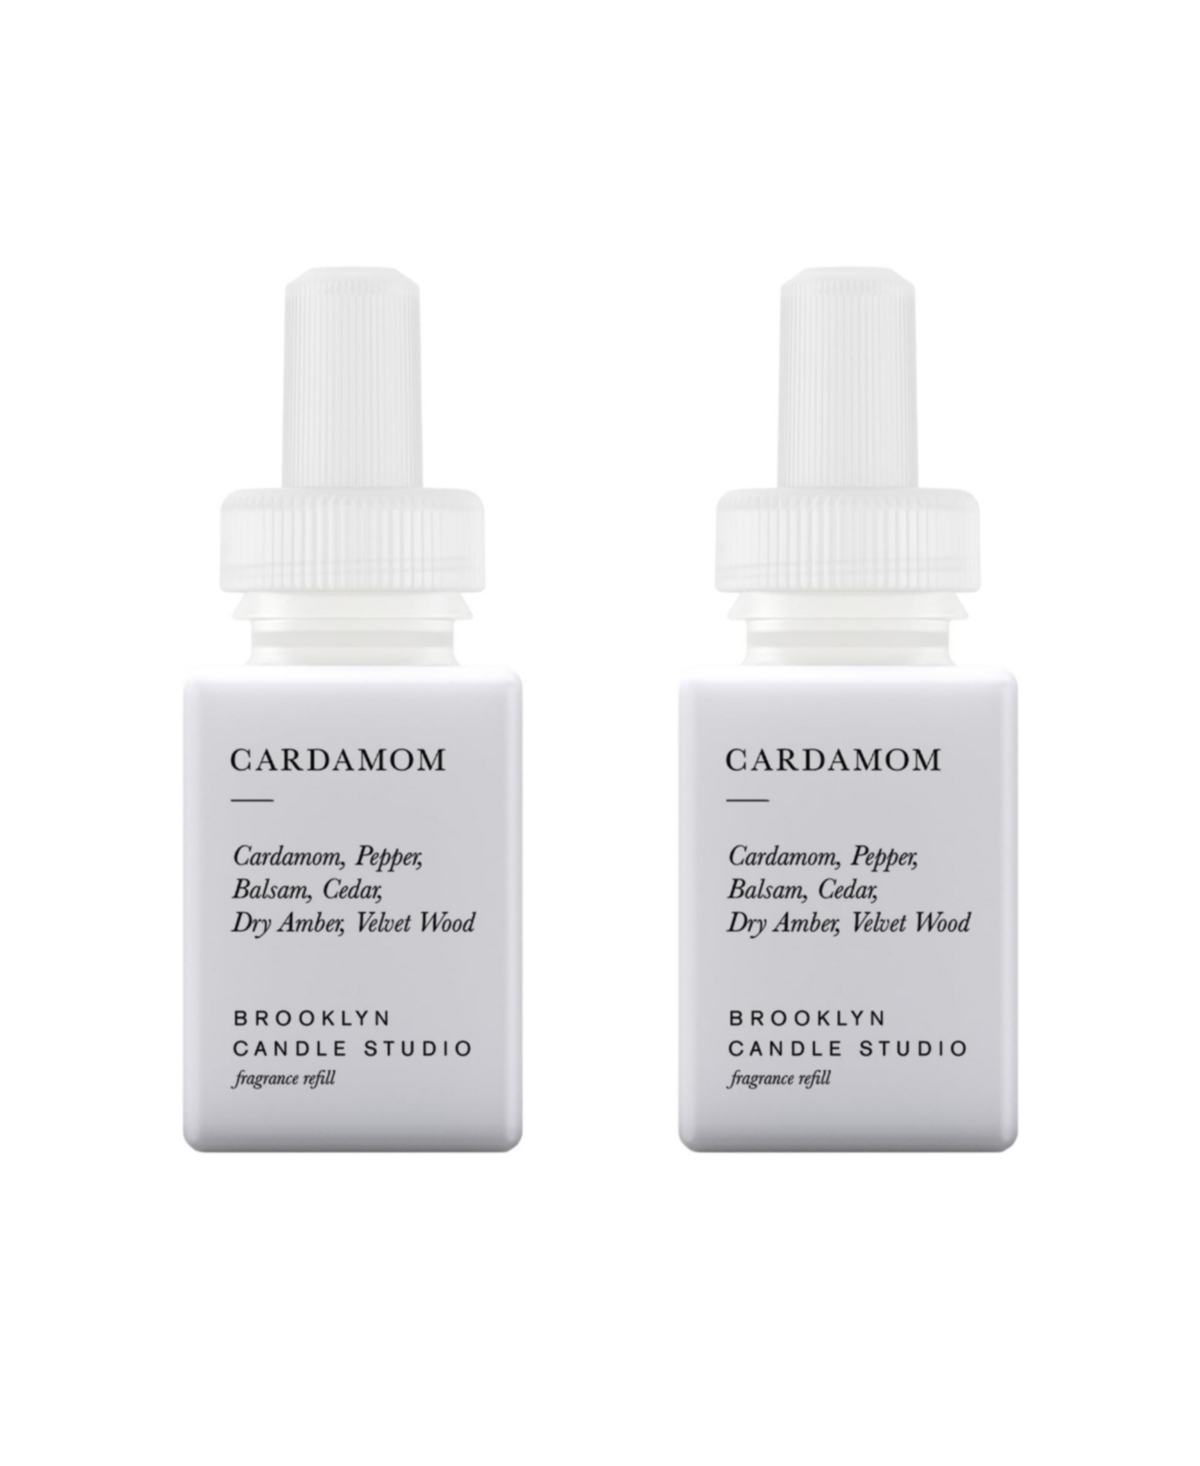 Brooklyn Candle Studio - Cardamom - Home Scent Refill - Smart Home Air Diffuser Fragrance - Up to 120-Hours of Luxury Fragrance per Vial - Clean